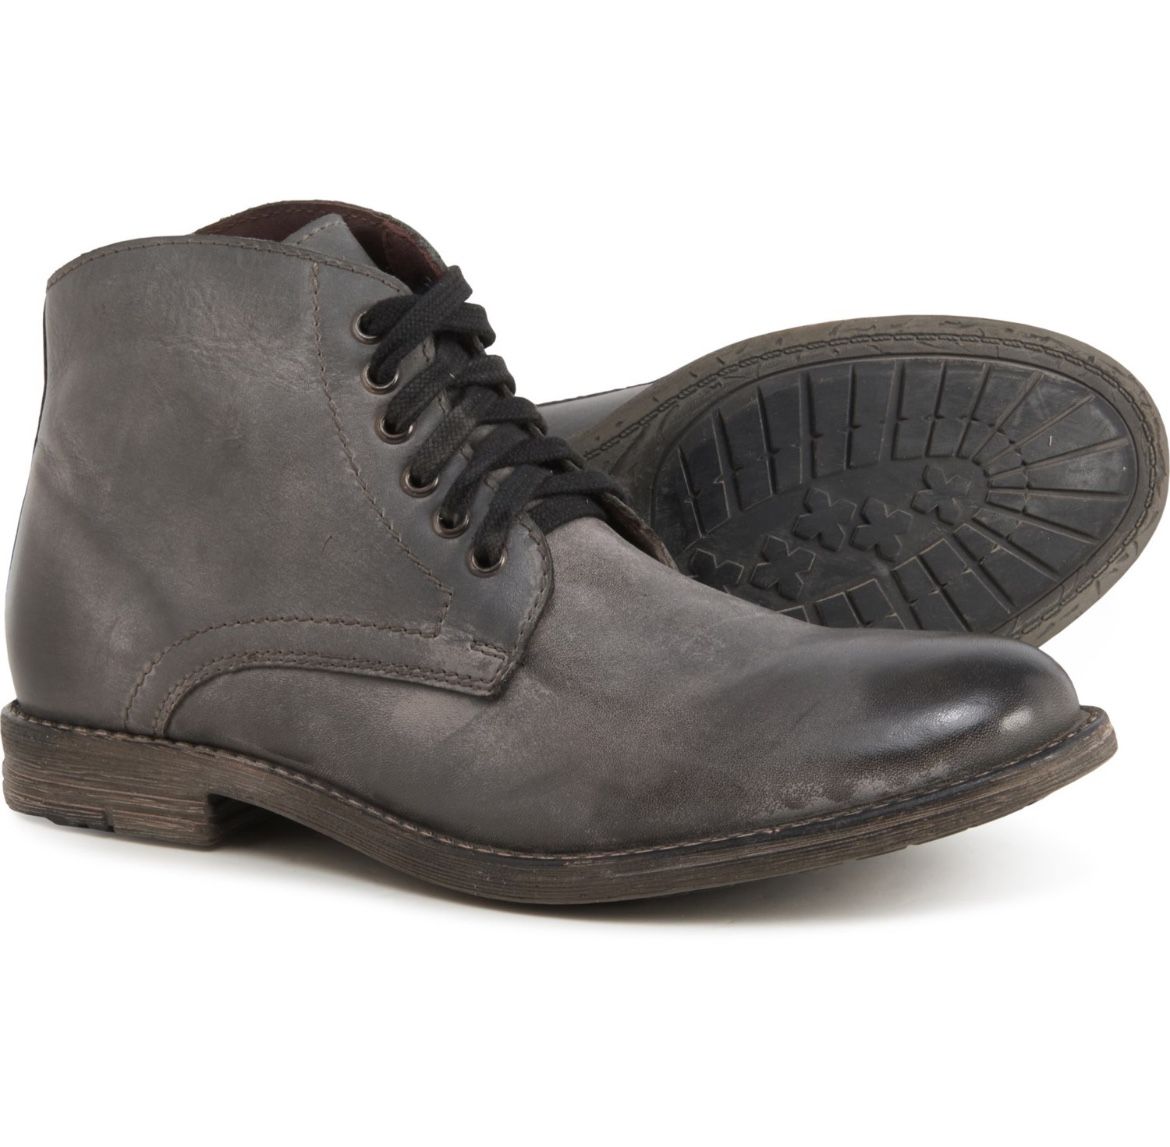 ROAN BY BED STU proff Boots - Leather, Men’s 